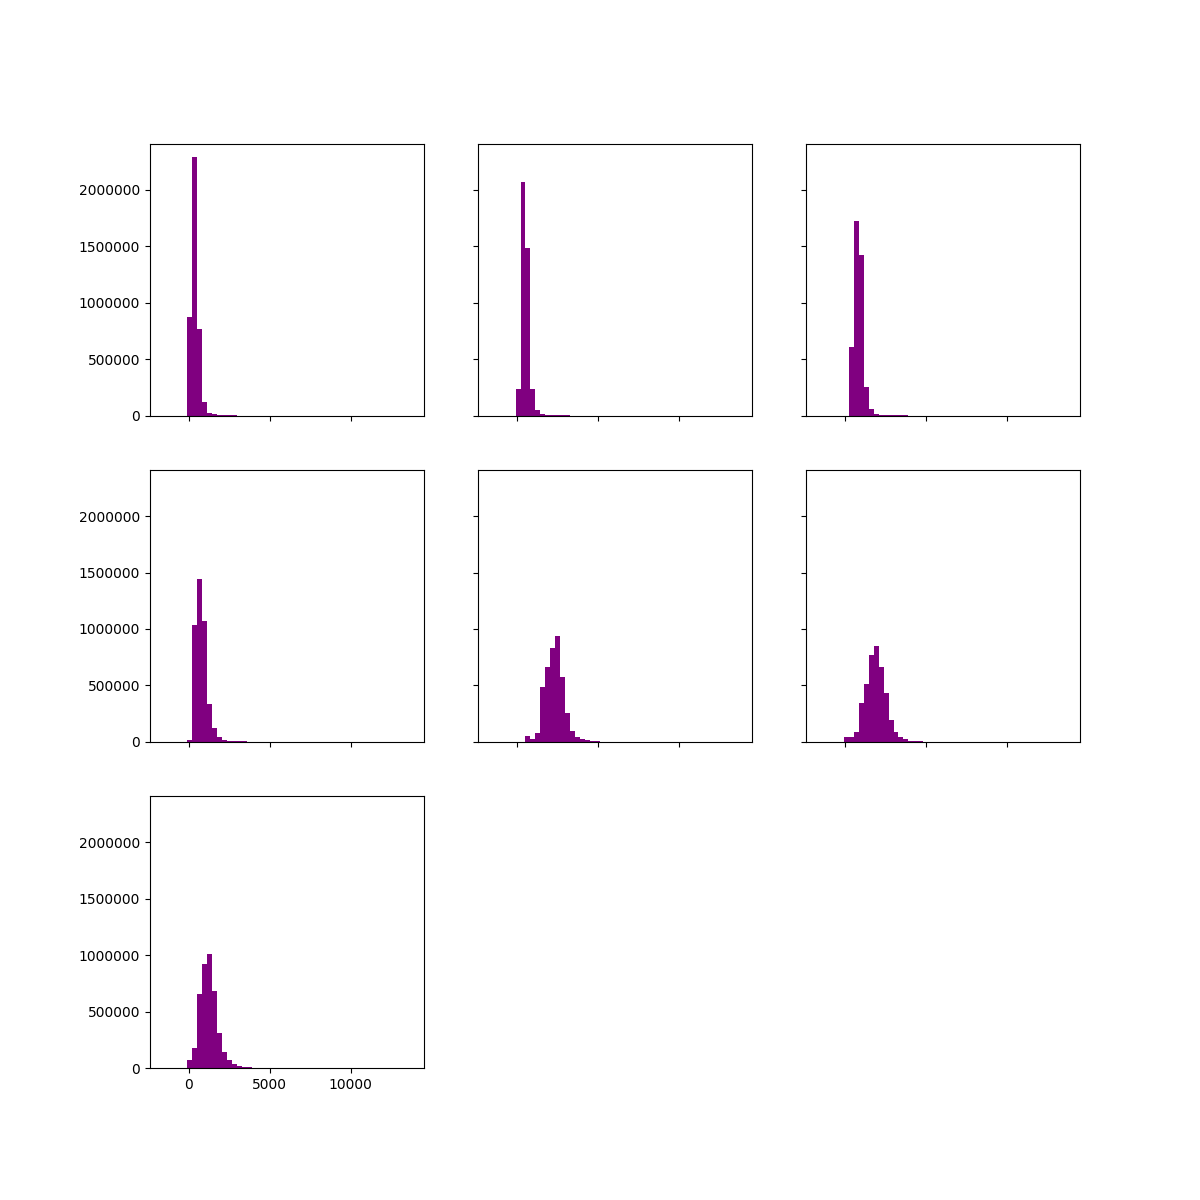 ../_images/sphx_glr_plot_hist_functionality_002.png